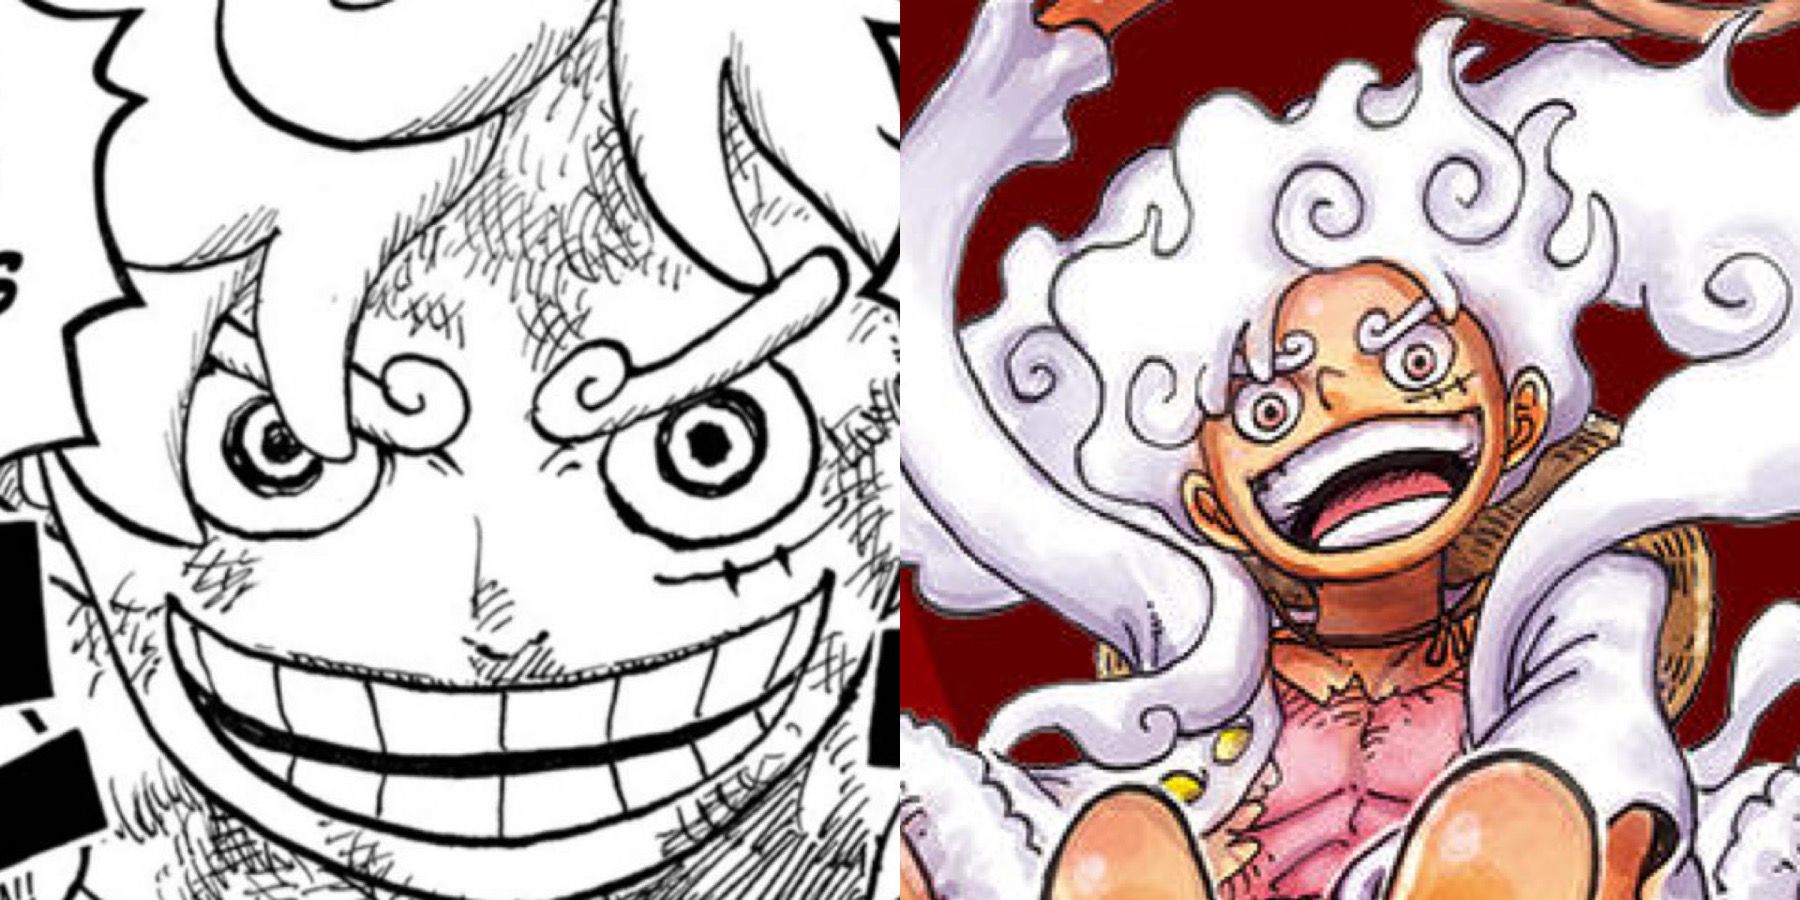 Luffy Already Has MULTIPLE DEVIL FRUITS!! The TRUTH about Hito Hito no mi  Model Nika in One Piece 